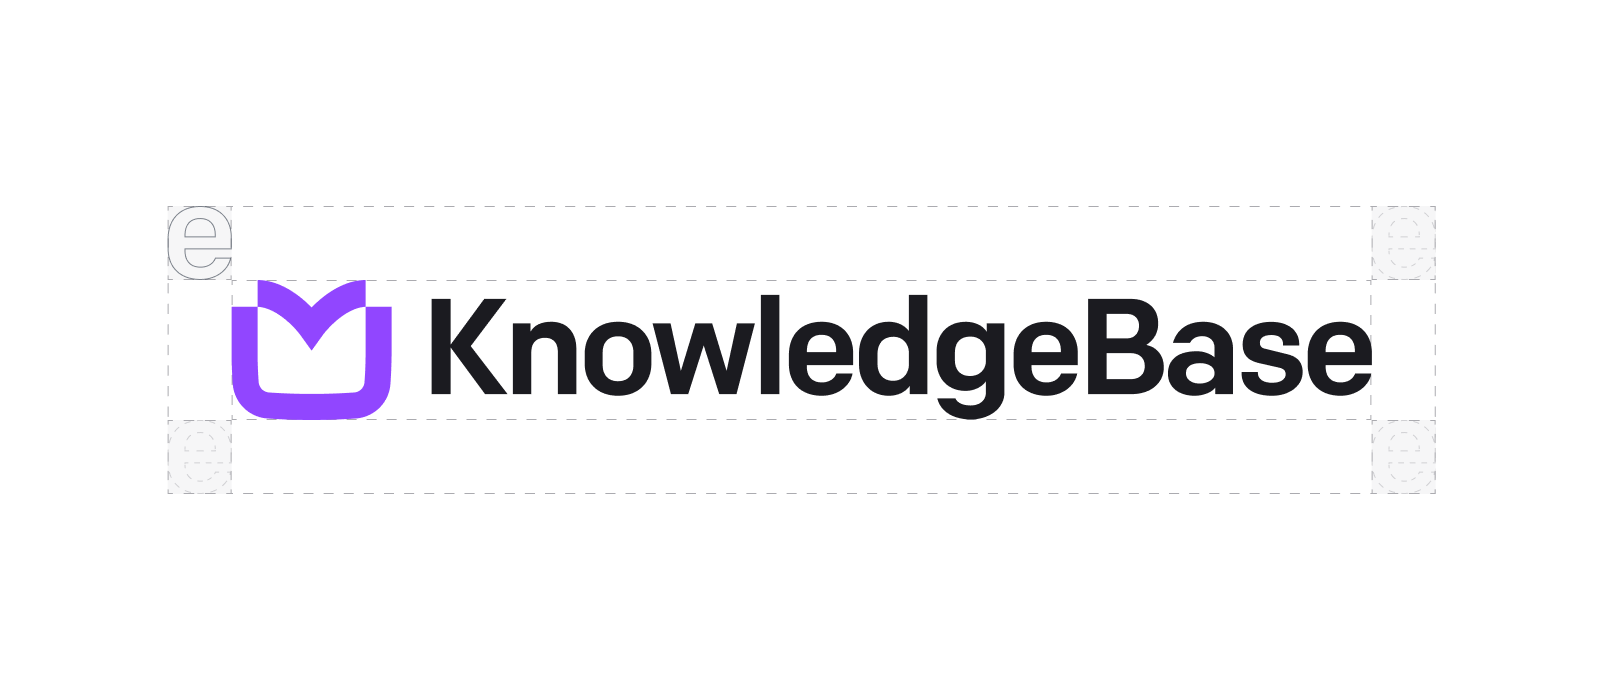 KnowledgeBase logo clear space